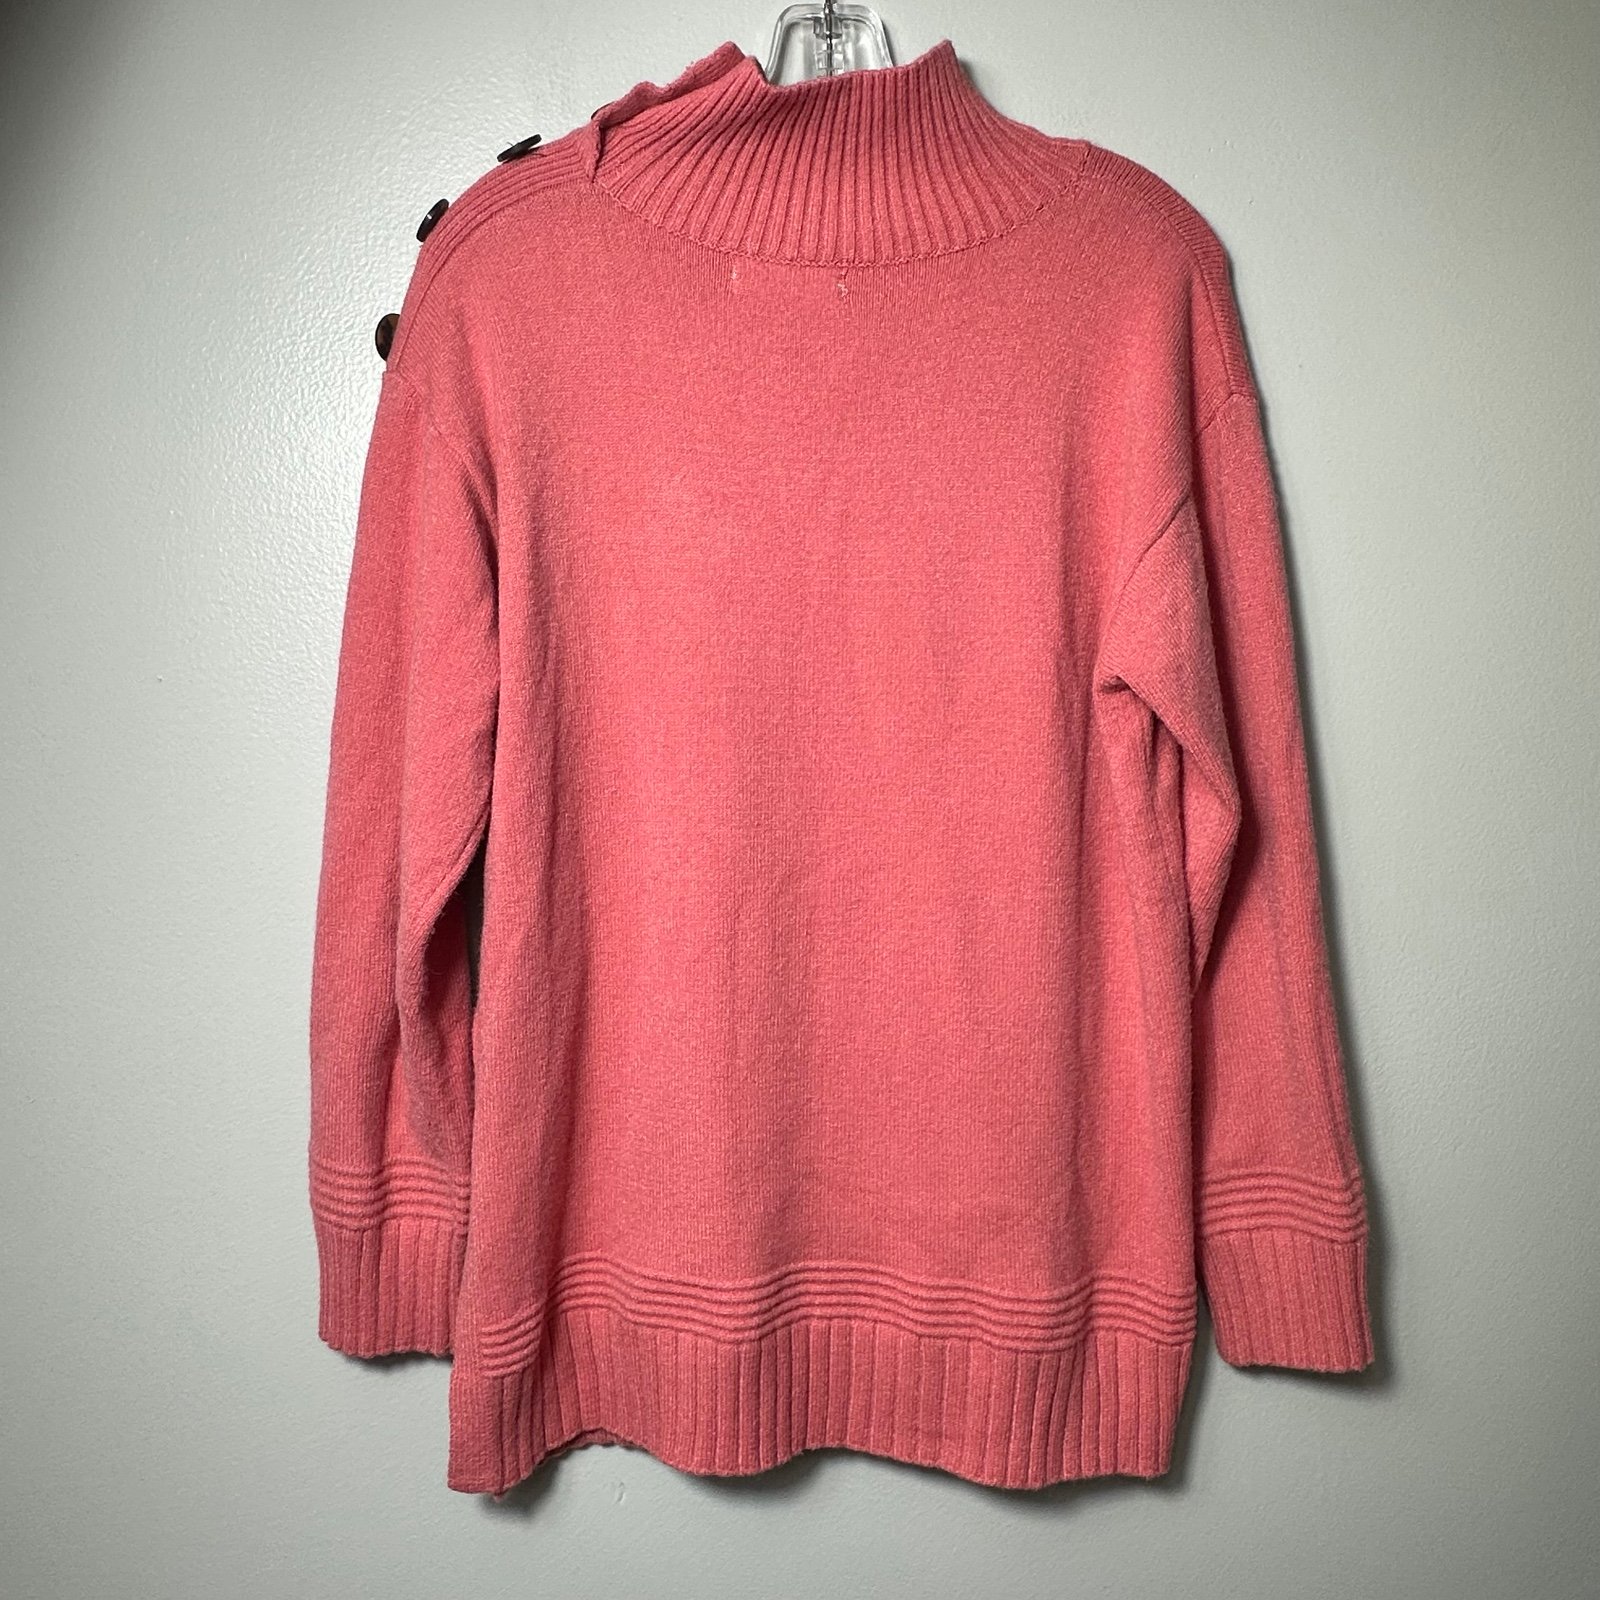 large discount Anthropologie Margarita Tunic Sweater Button Shoulder Coral Pink Pullover Small hMNuGaH4G Counter Genuine 